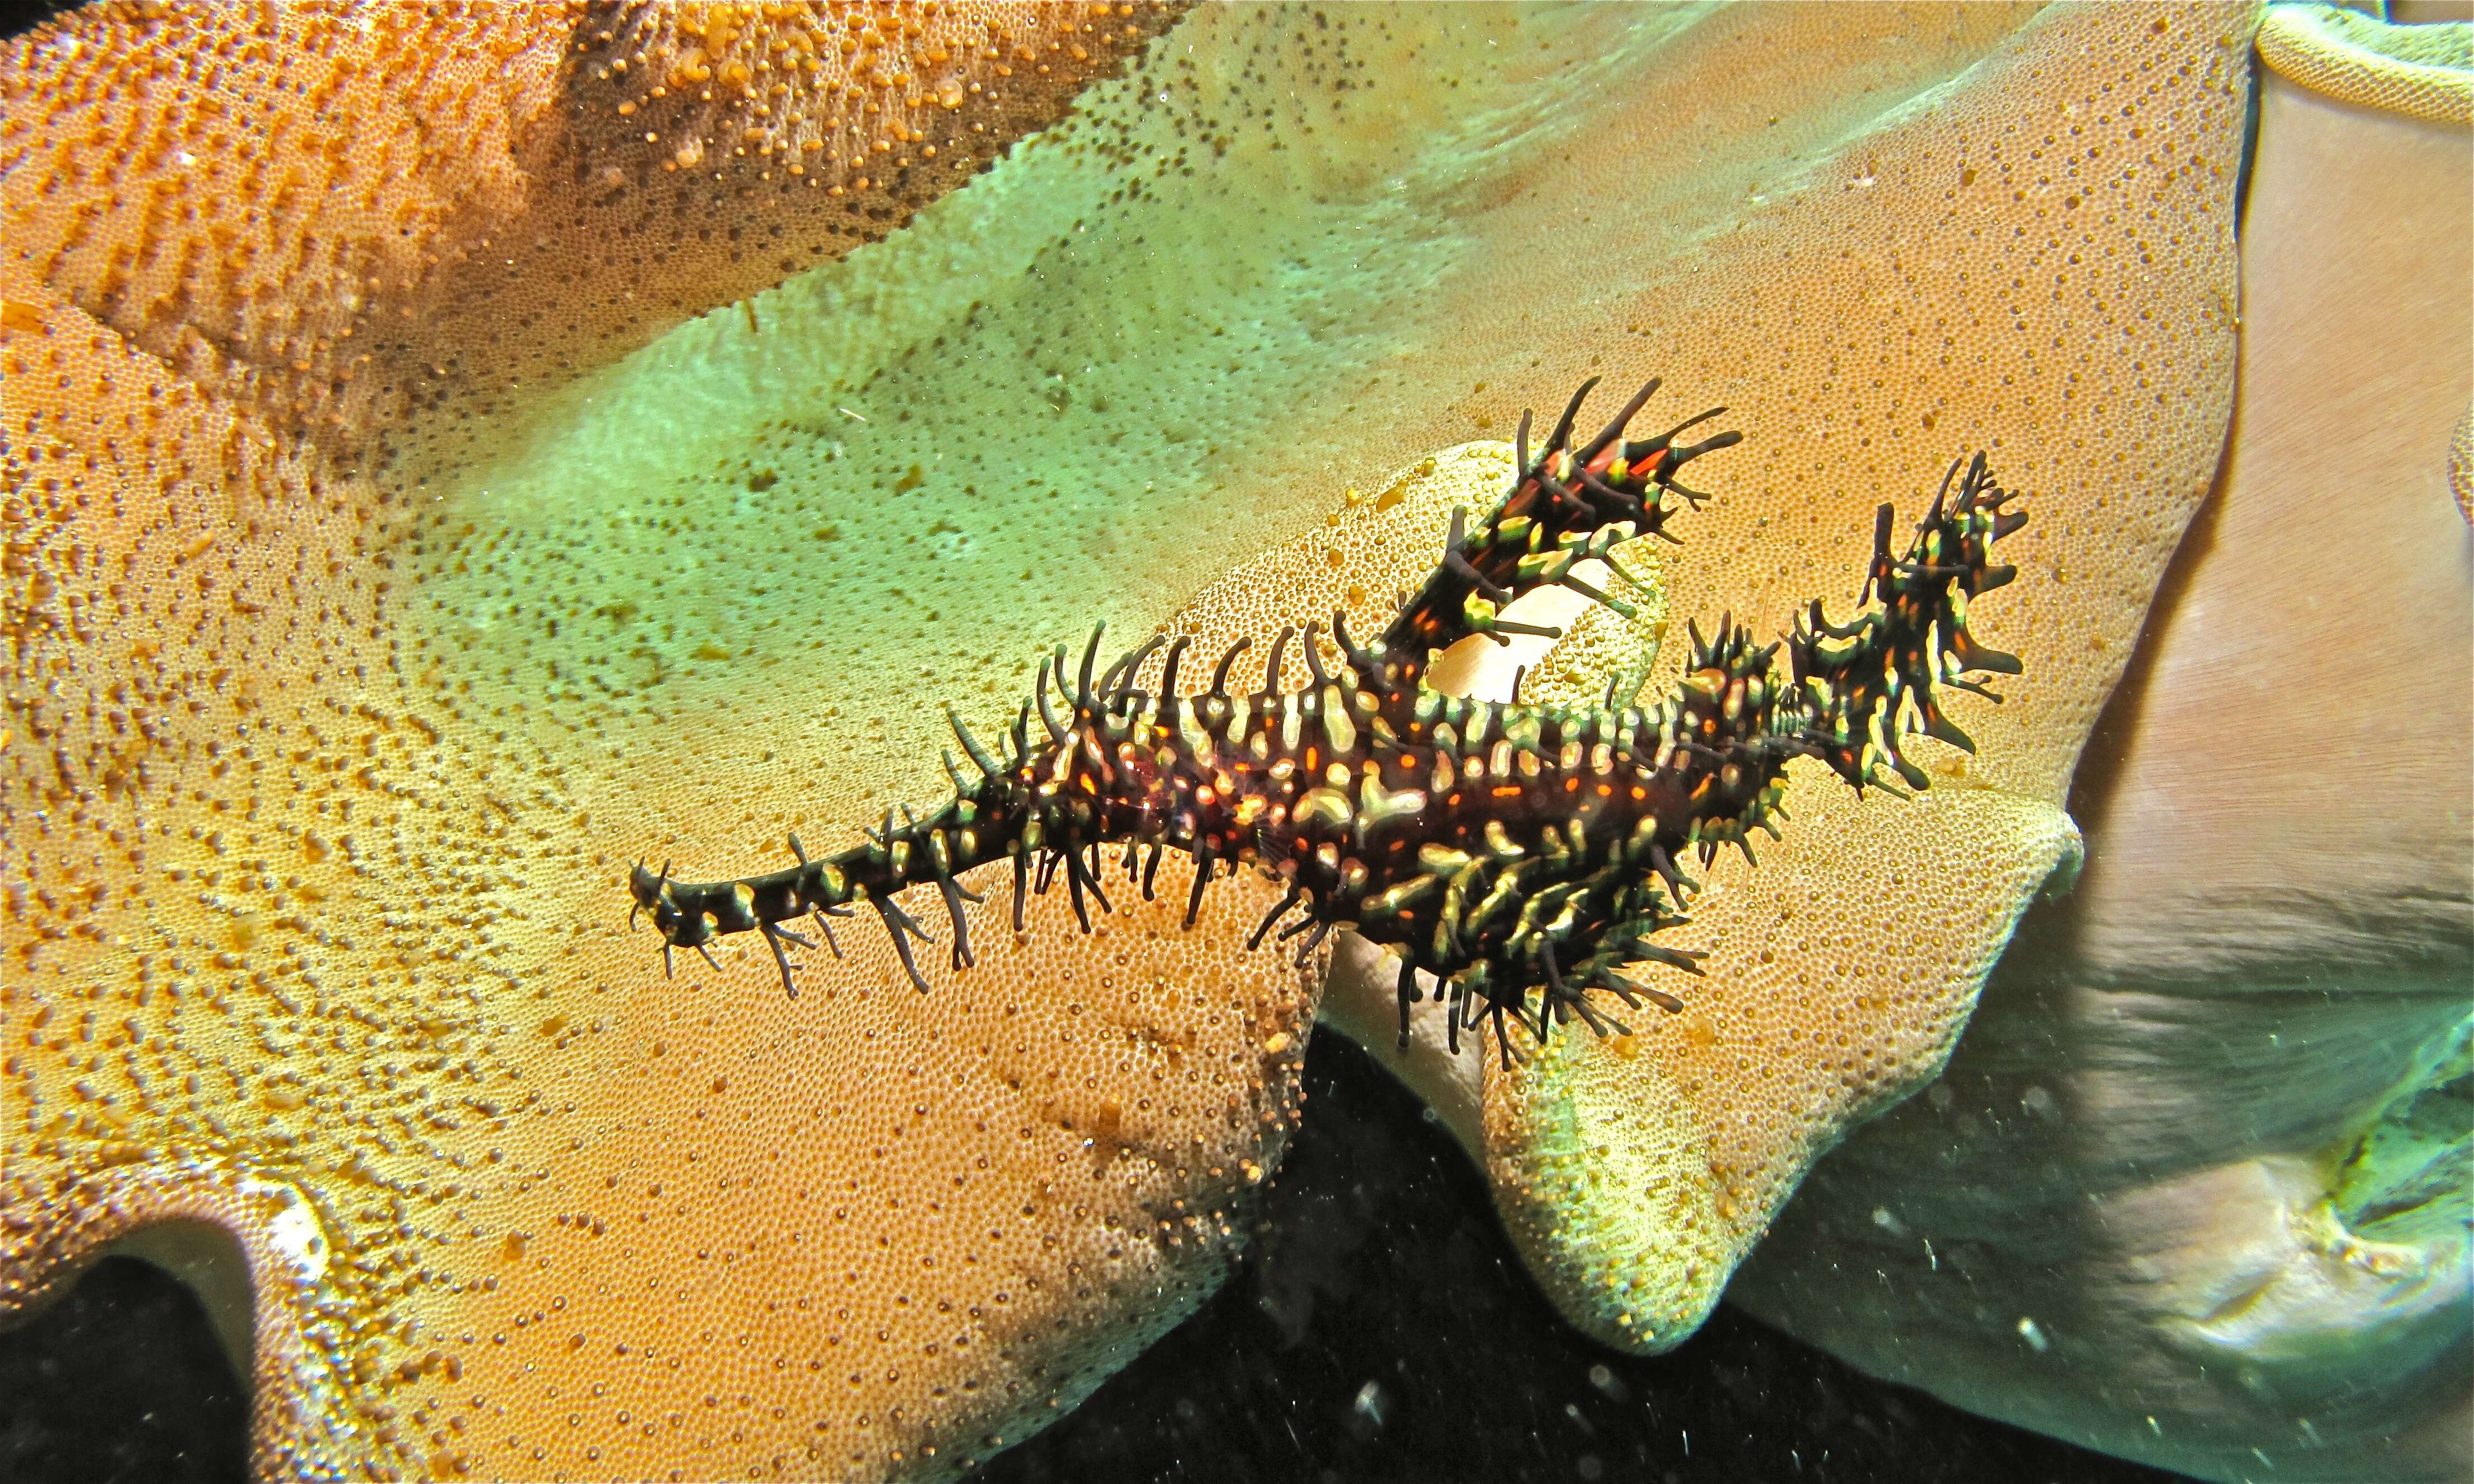 Image of ghost pipefishes